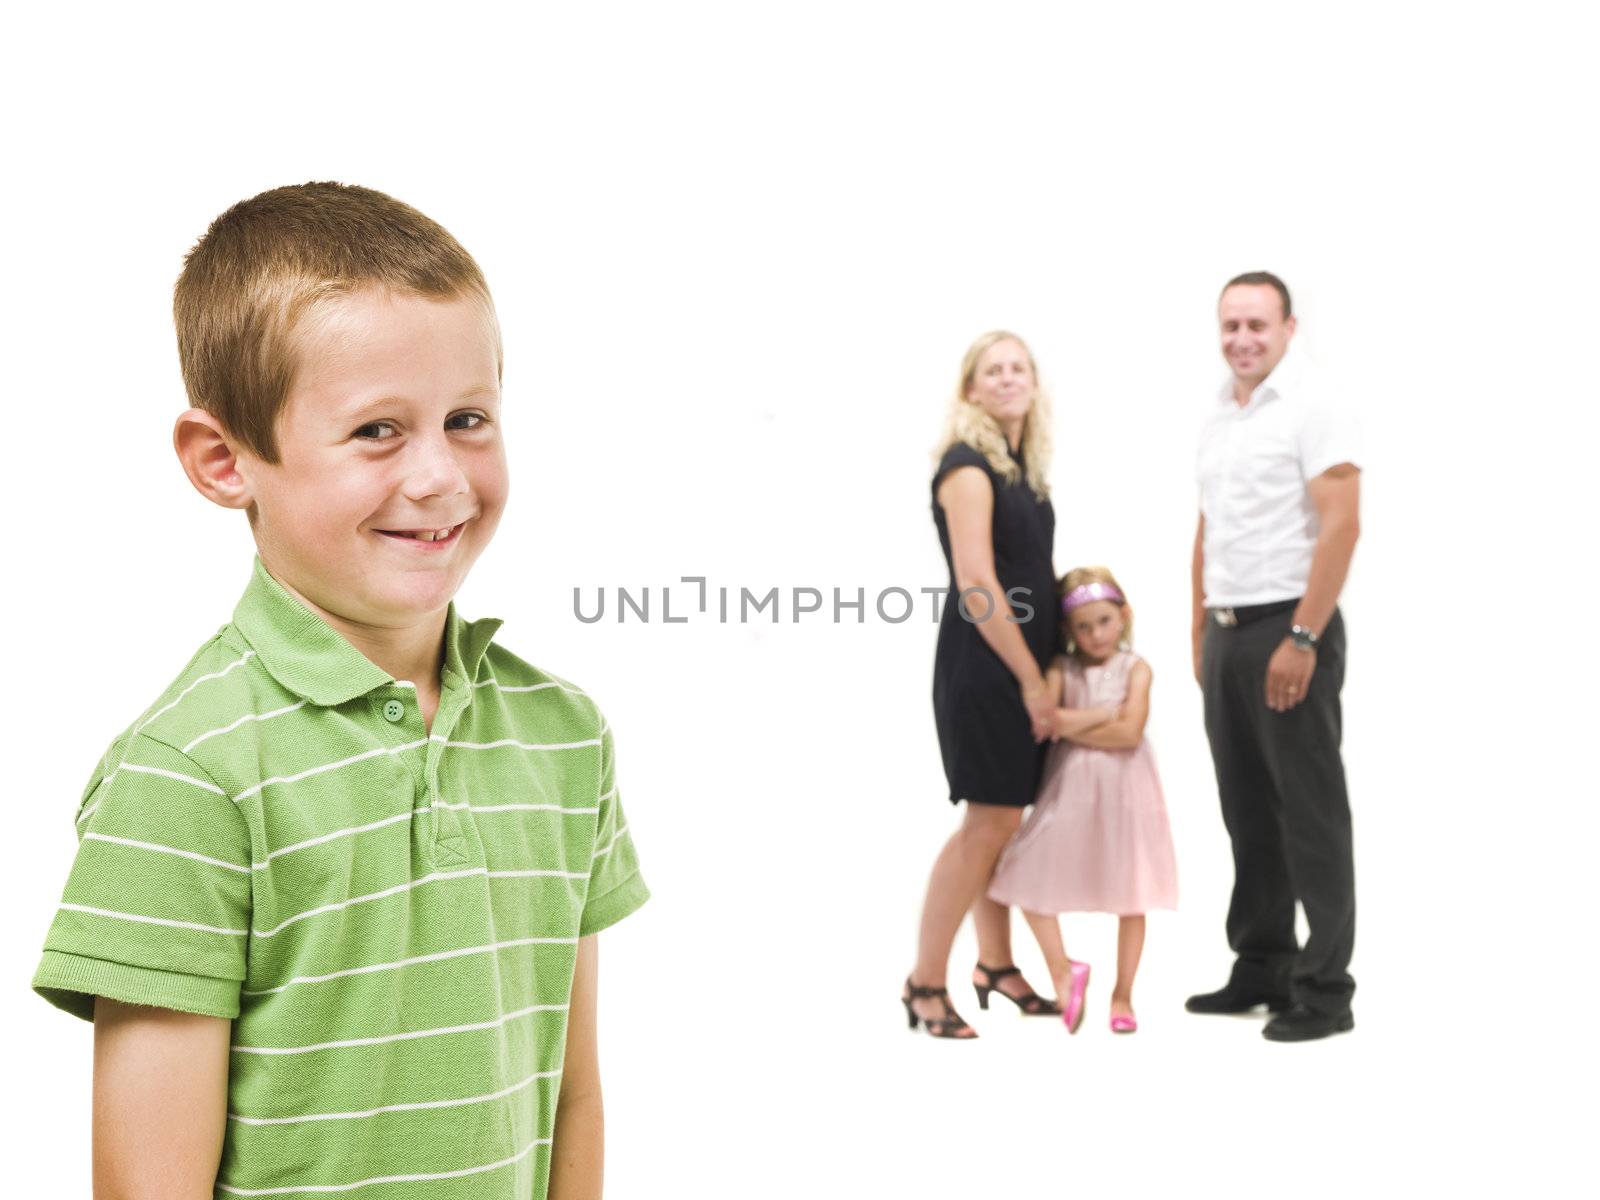 Young boy in front of his family isolated on white background